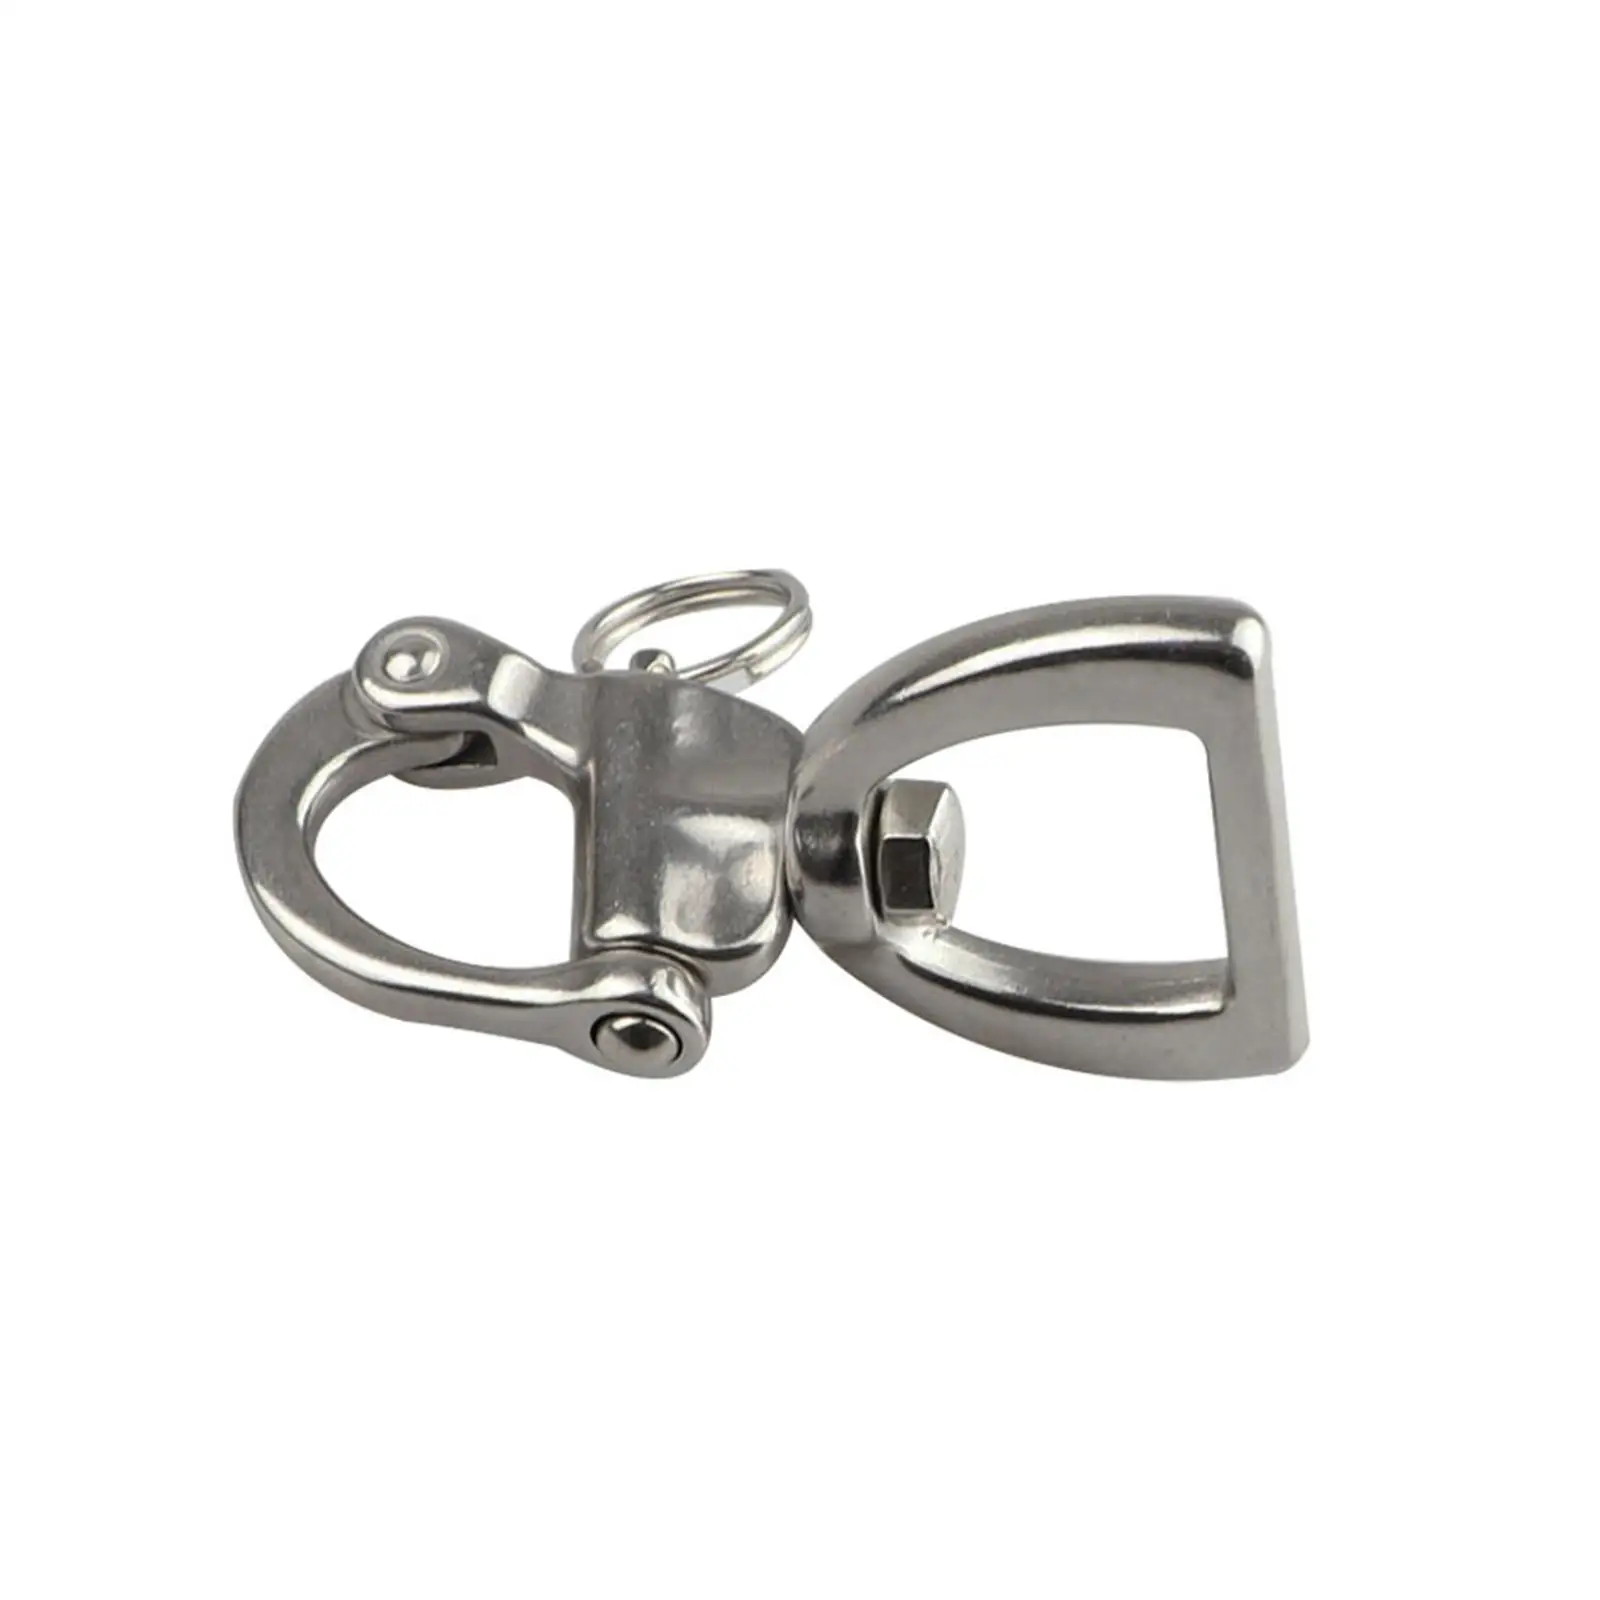 Snap Shackle Rotating Heavy Duty Stainless Steel Shackle Quick Release for Yacht